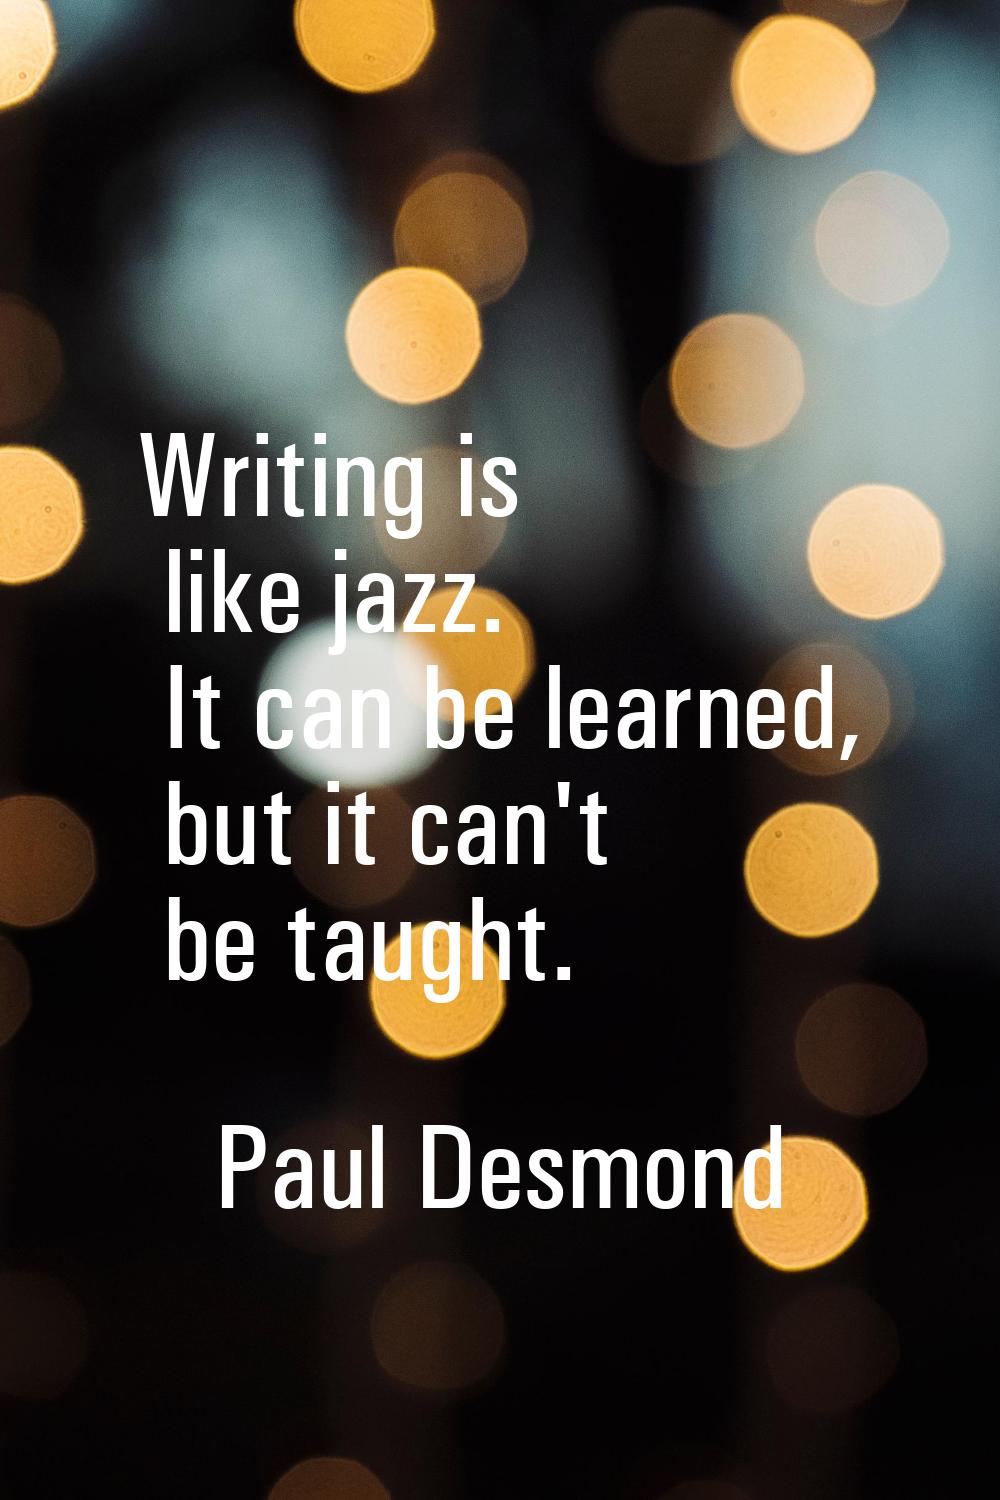 Writing is like jazz. It can be learned, but it can't be taught.